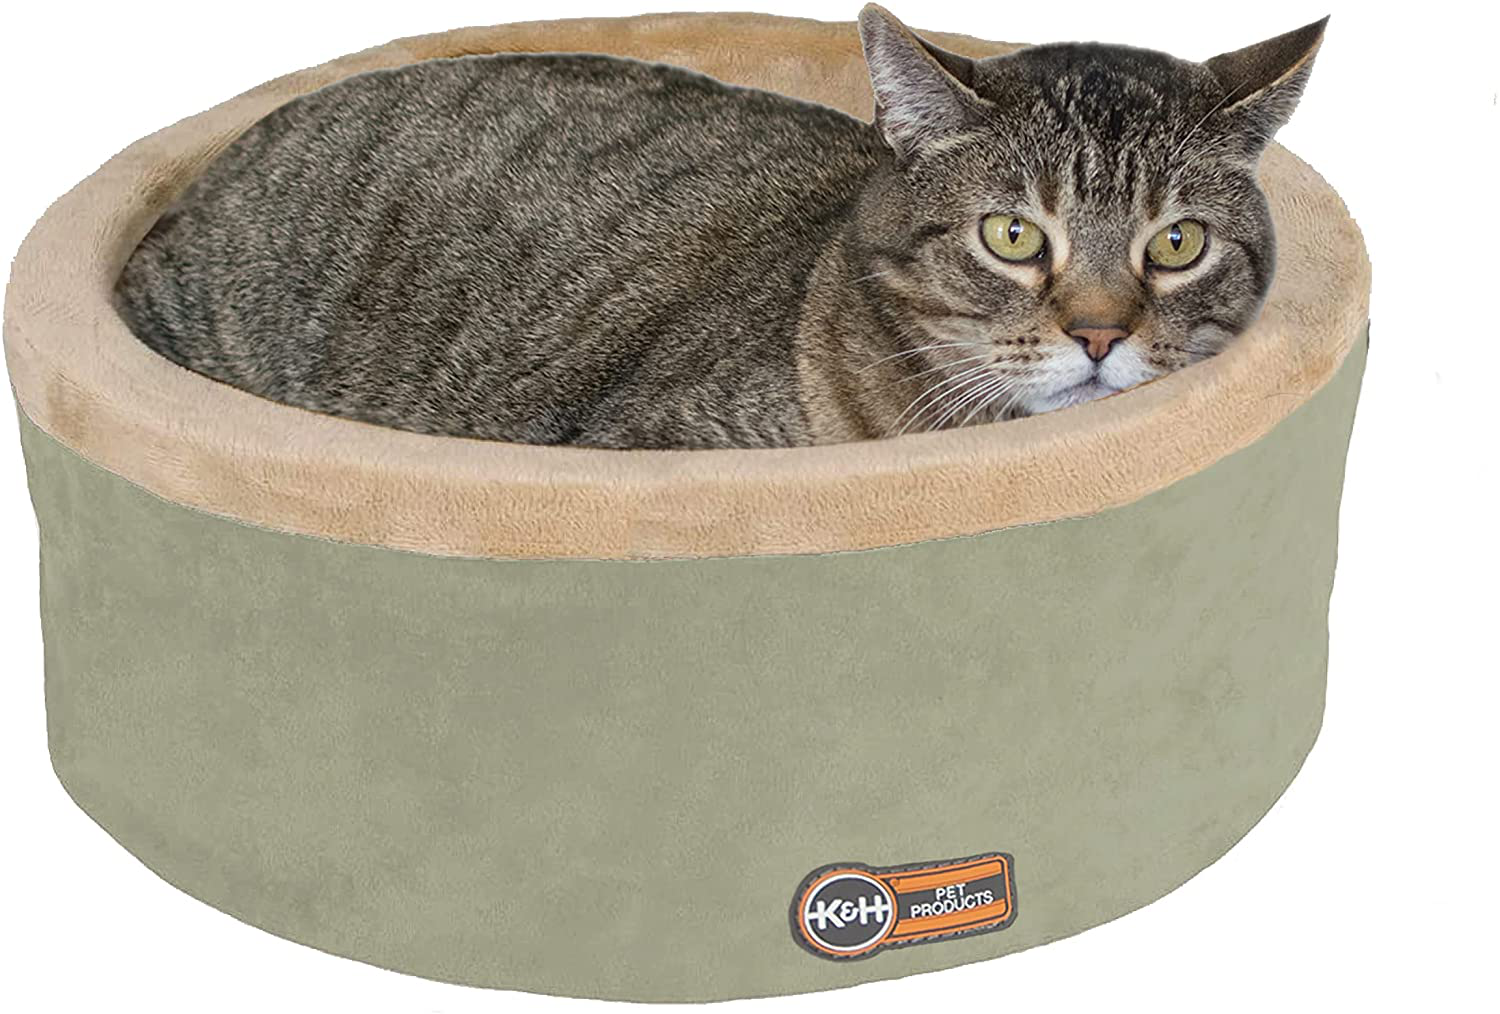 K&H Pet Products Thermo-Kitty Heated Cat Bed Animals & Pet Supplies > Pet Supplies > Dog Supplies > Dog Beds K&H PET PRODUCTS Recyclable Box Large (20 in) 